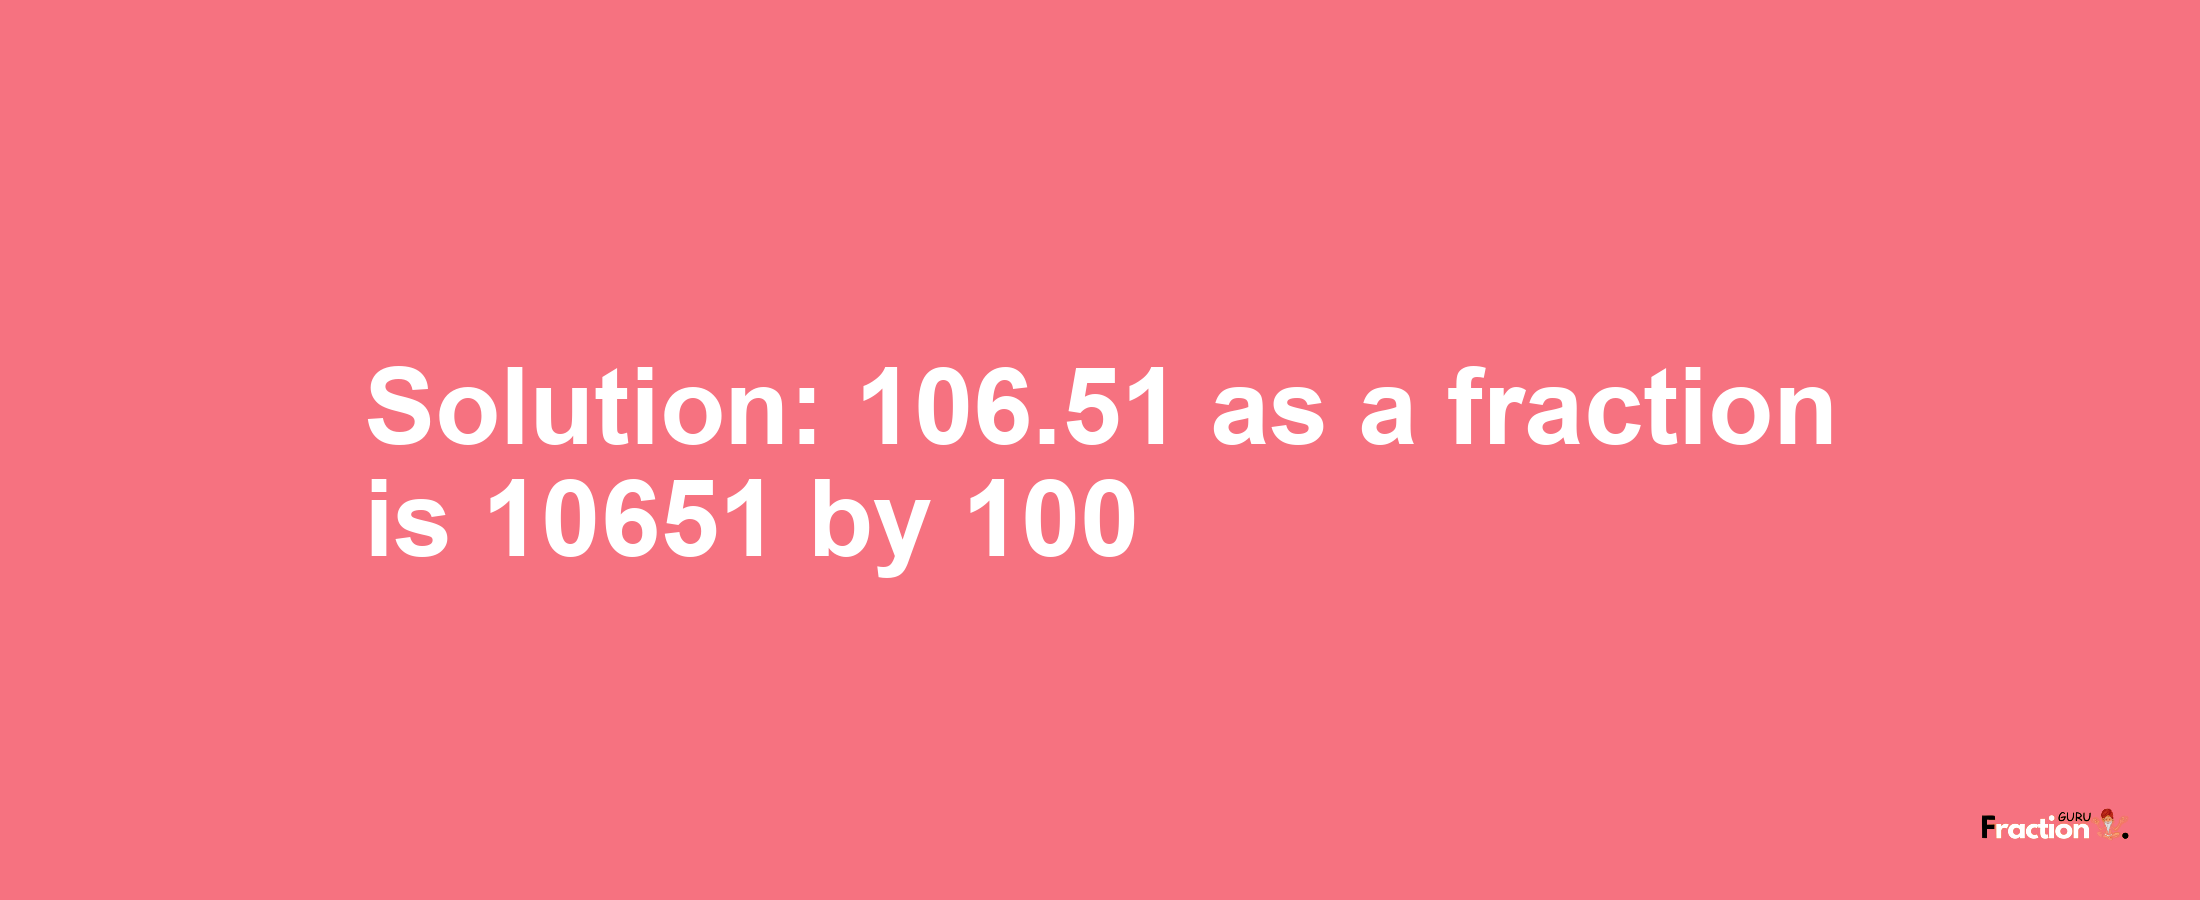 Solution:106.51 as a fraction is 10651/100